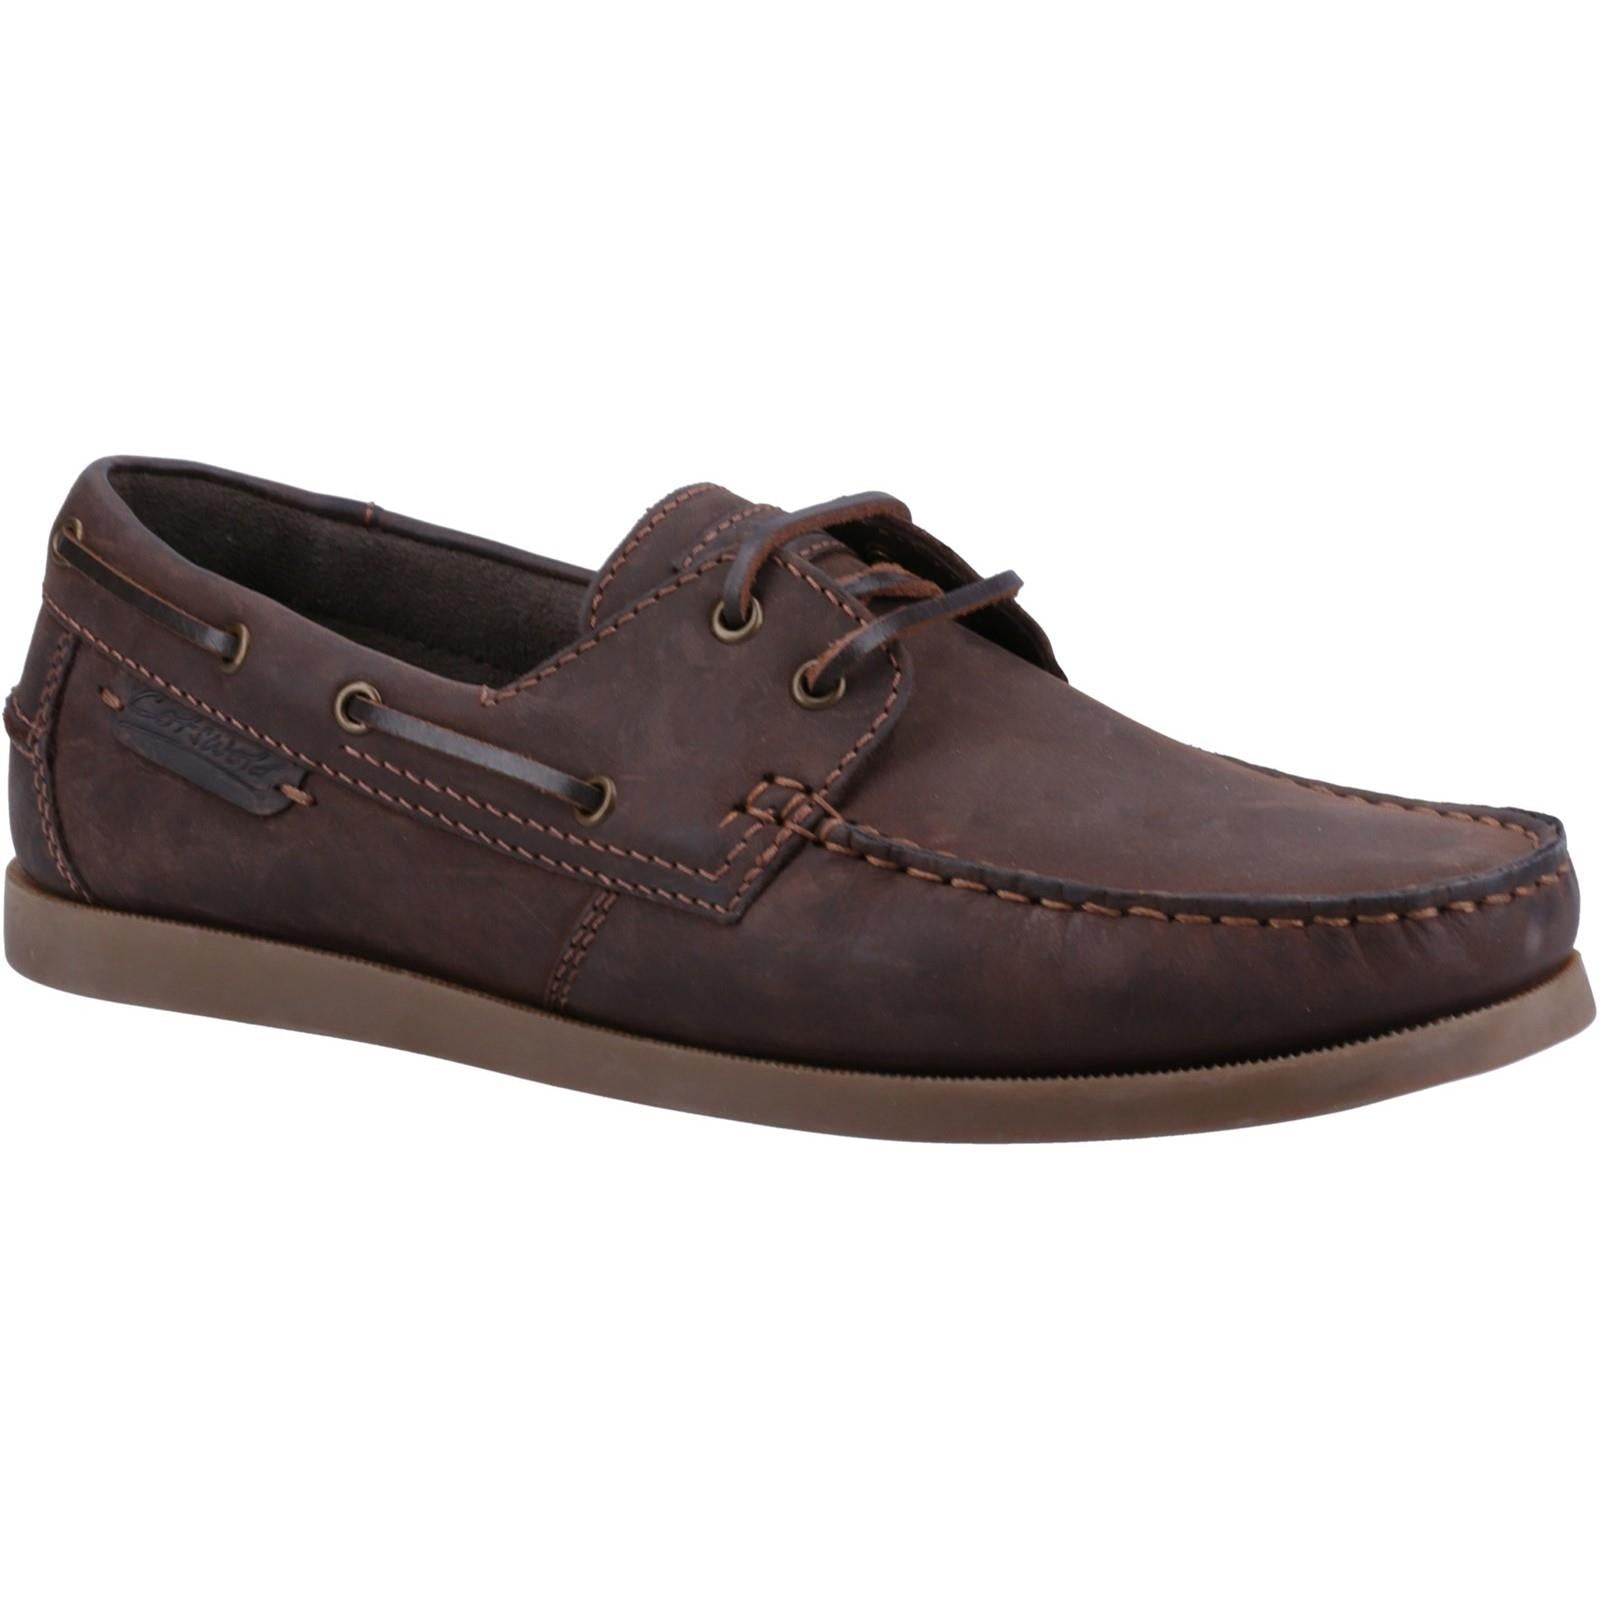 Cotswold Bartrim brown leather memory foam summer deck boat shoes